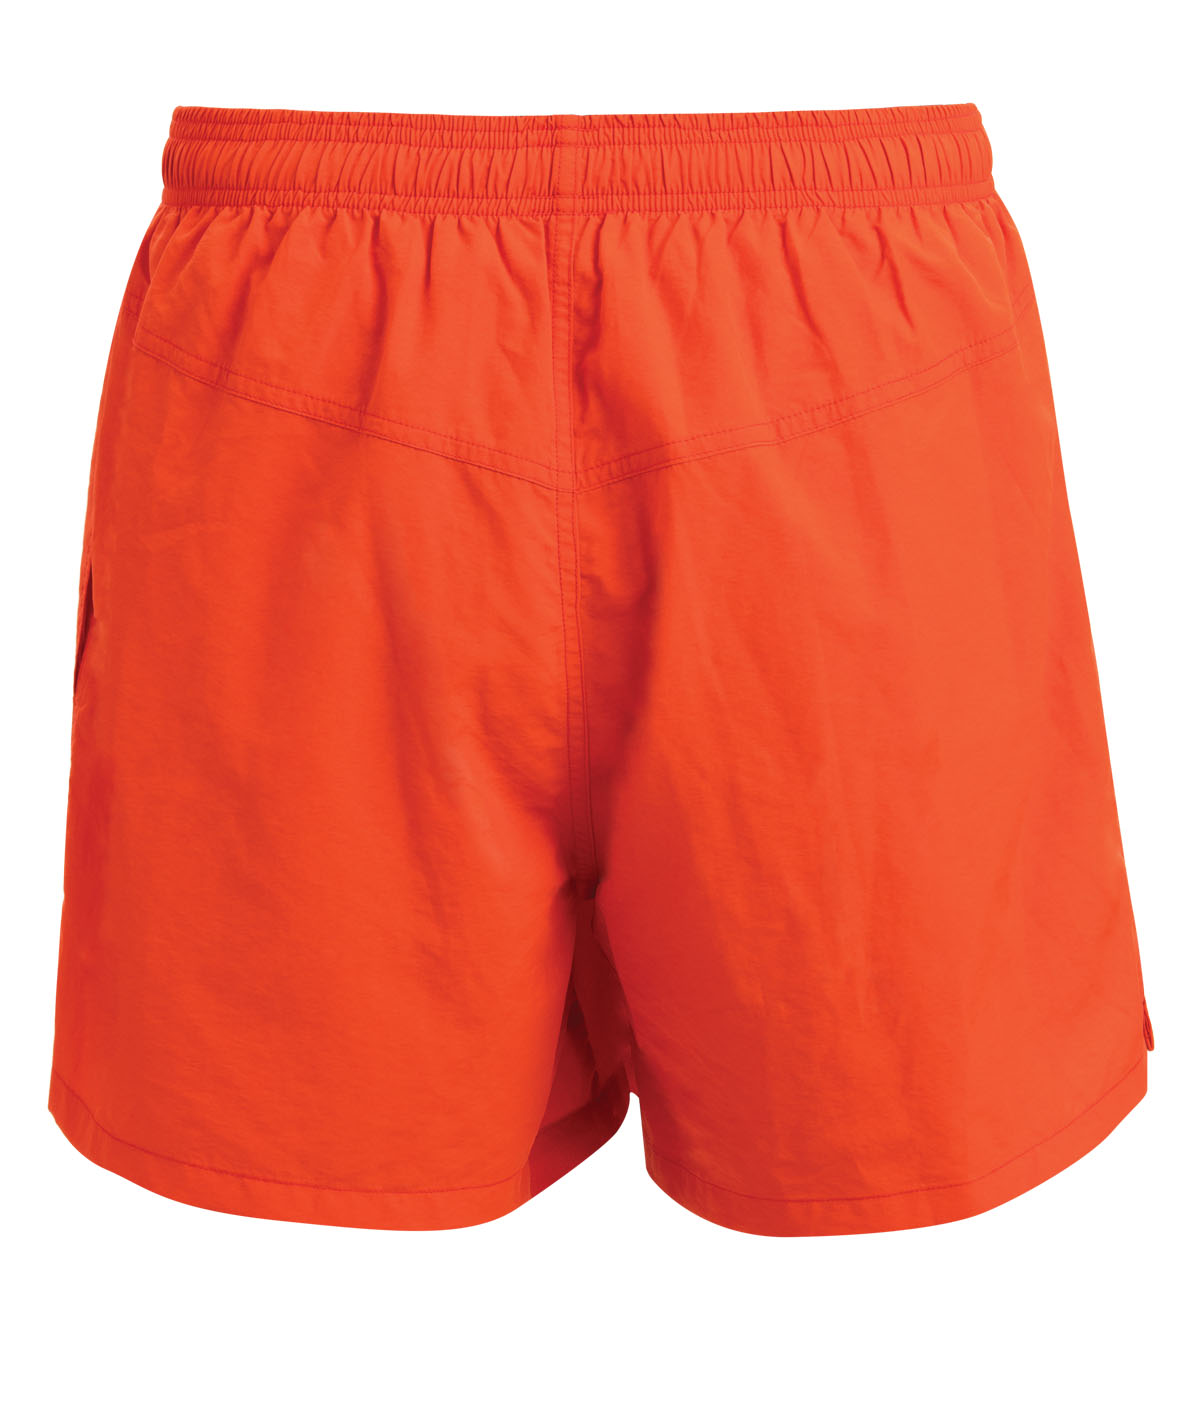 Youth Water Short Swimsuit